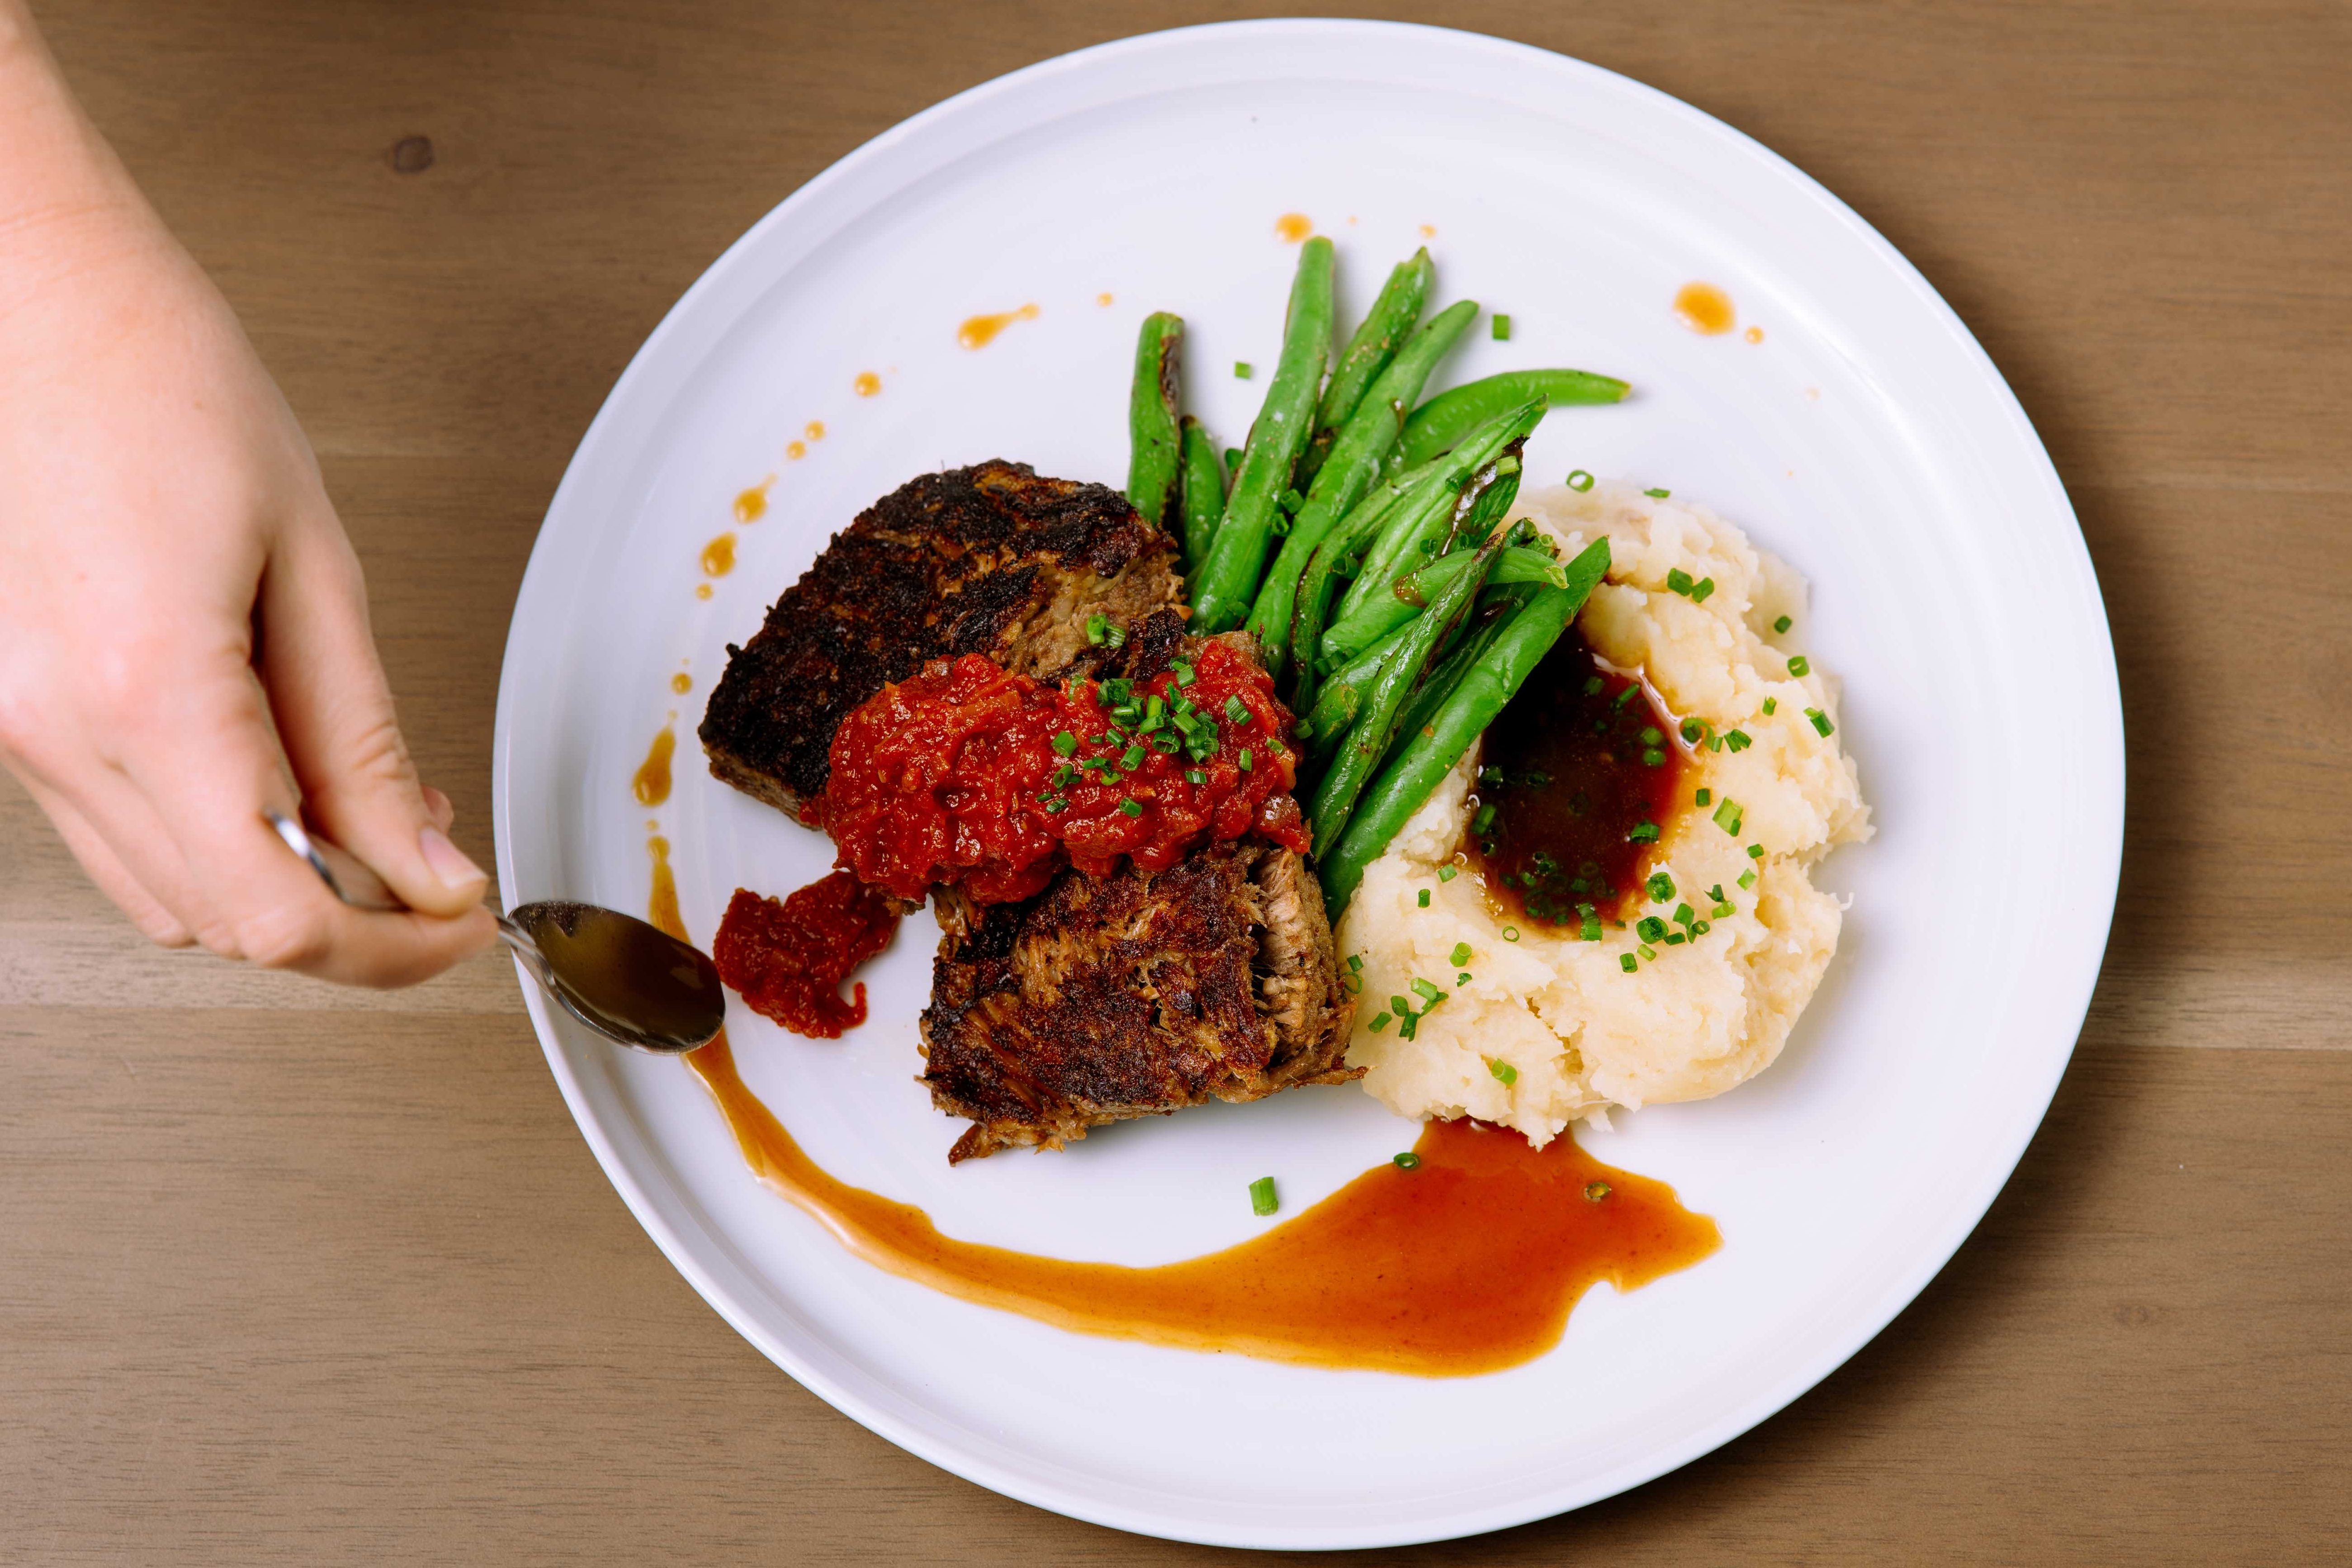 Southern-style meatloaf made with braised short ribs